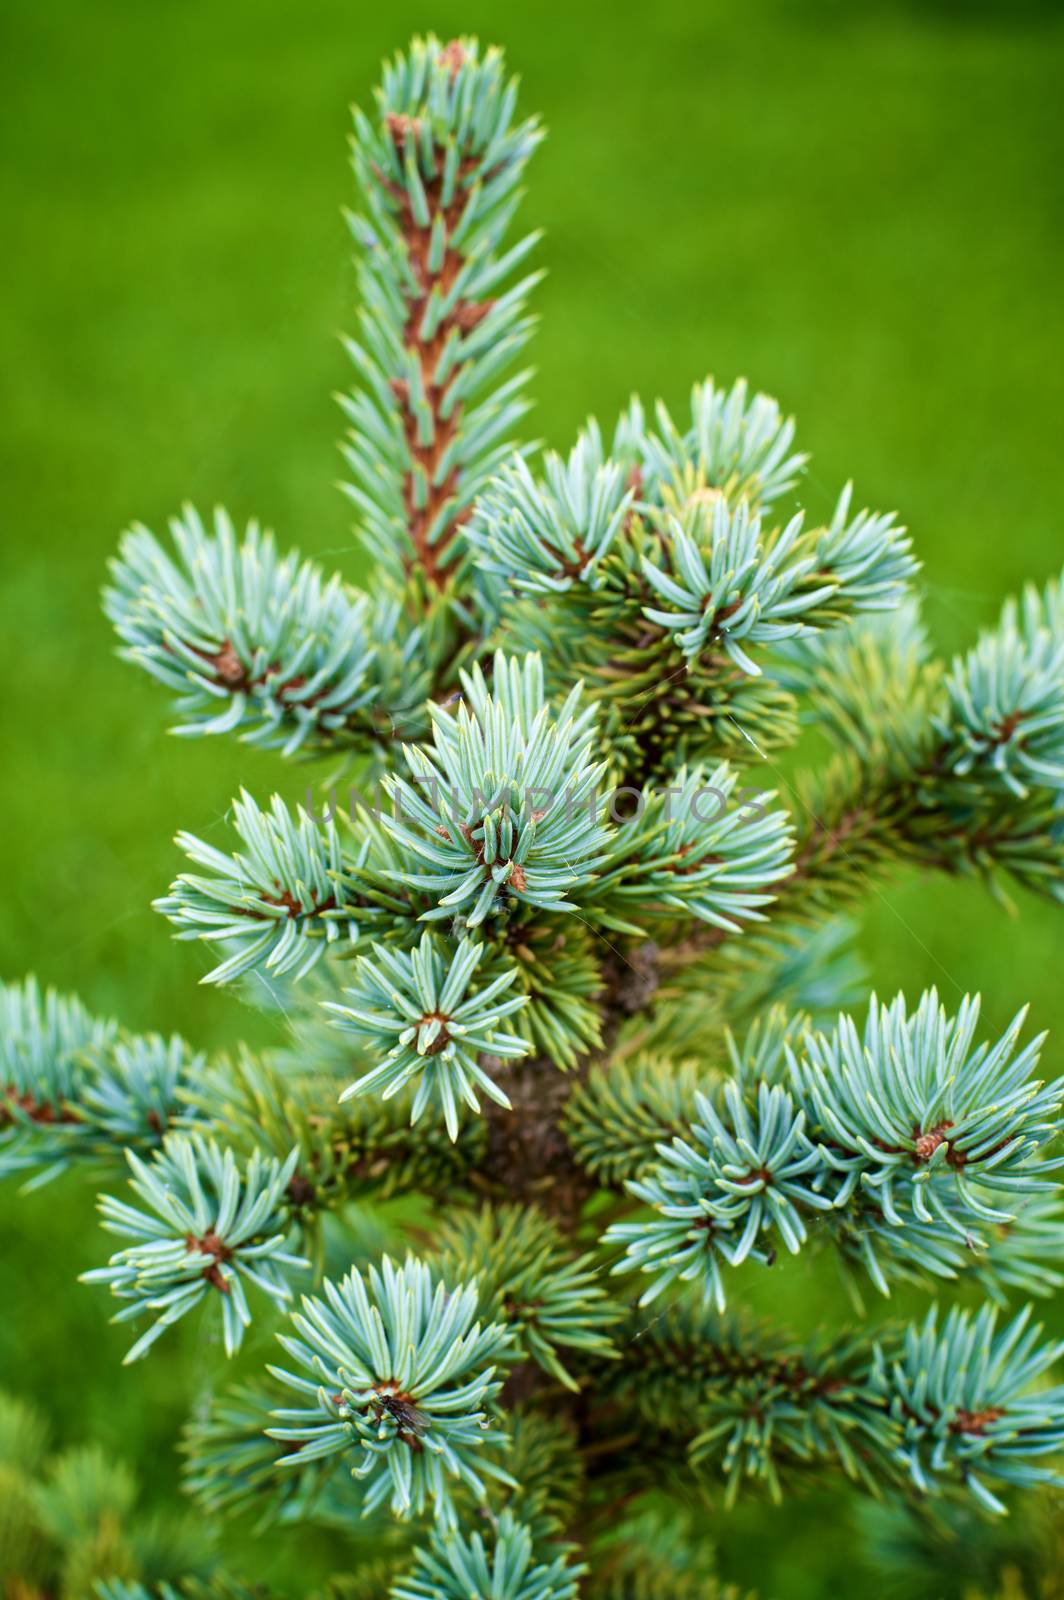 Top of Young Blue Spruce Shoots closeup on Blurred Natural Environment background Outdoors